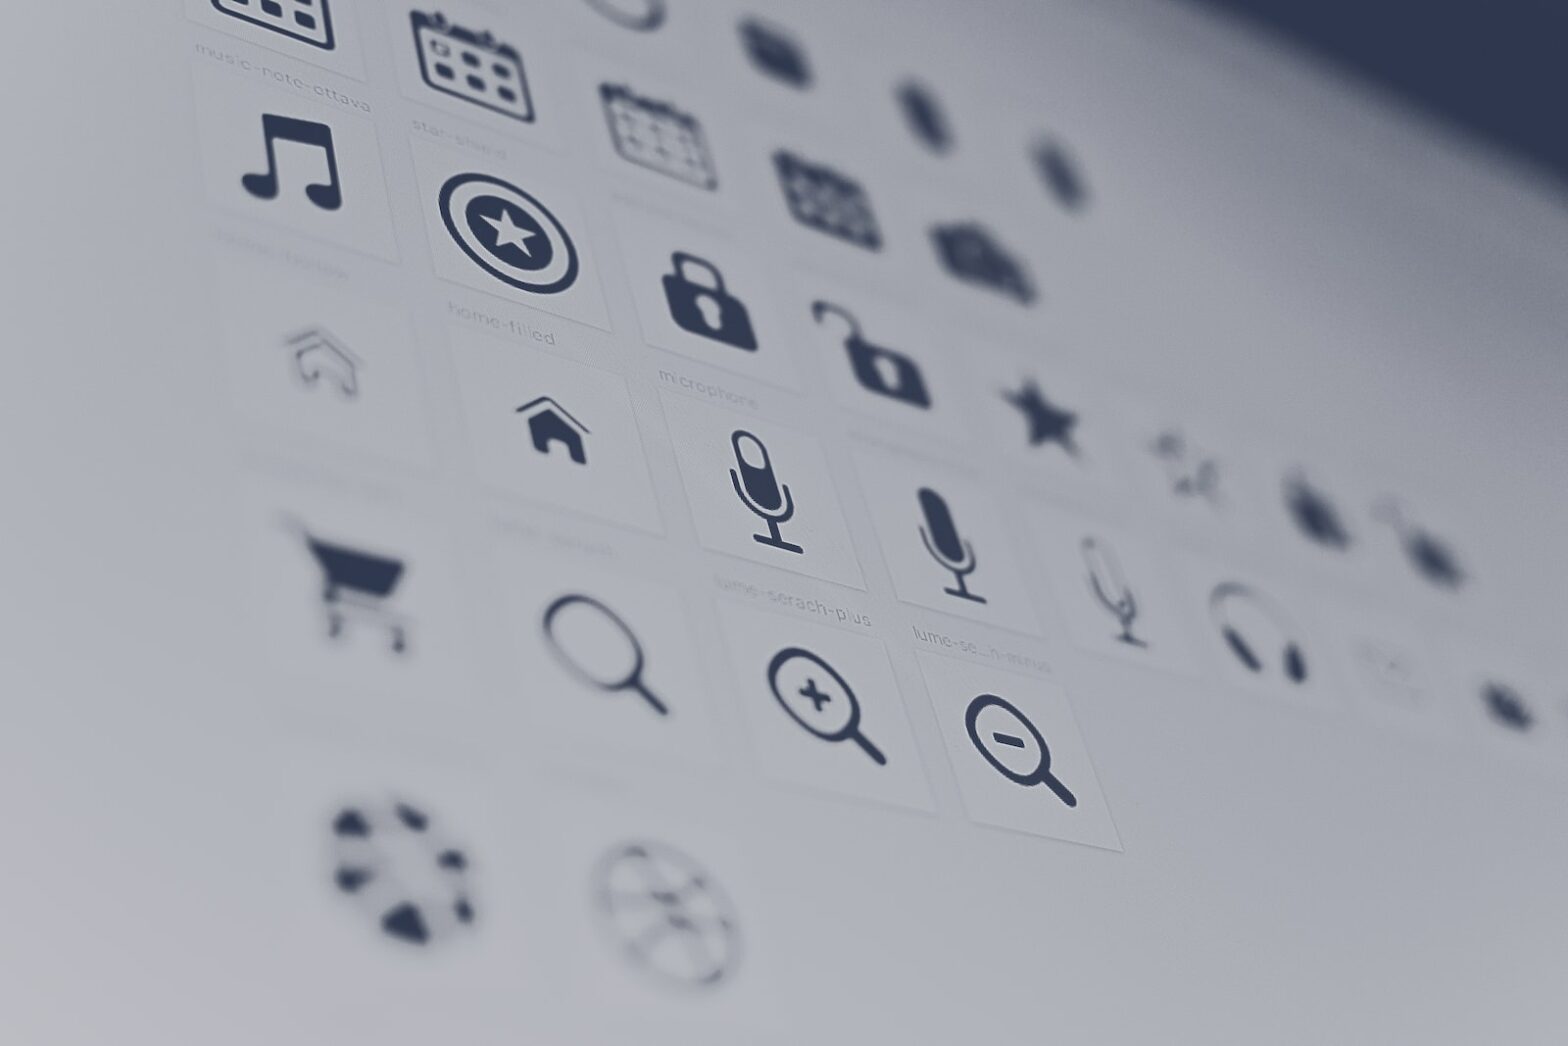 Flutter fui_kit 498 icons for your applications